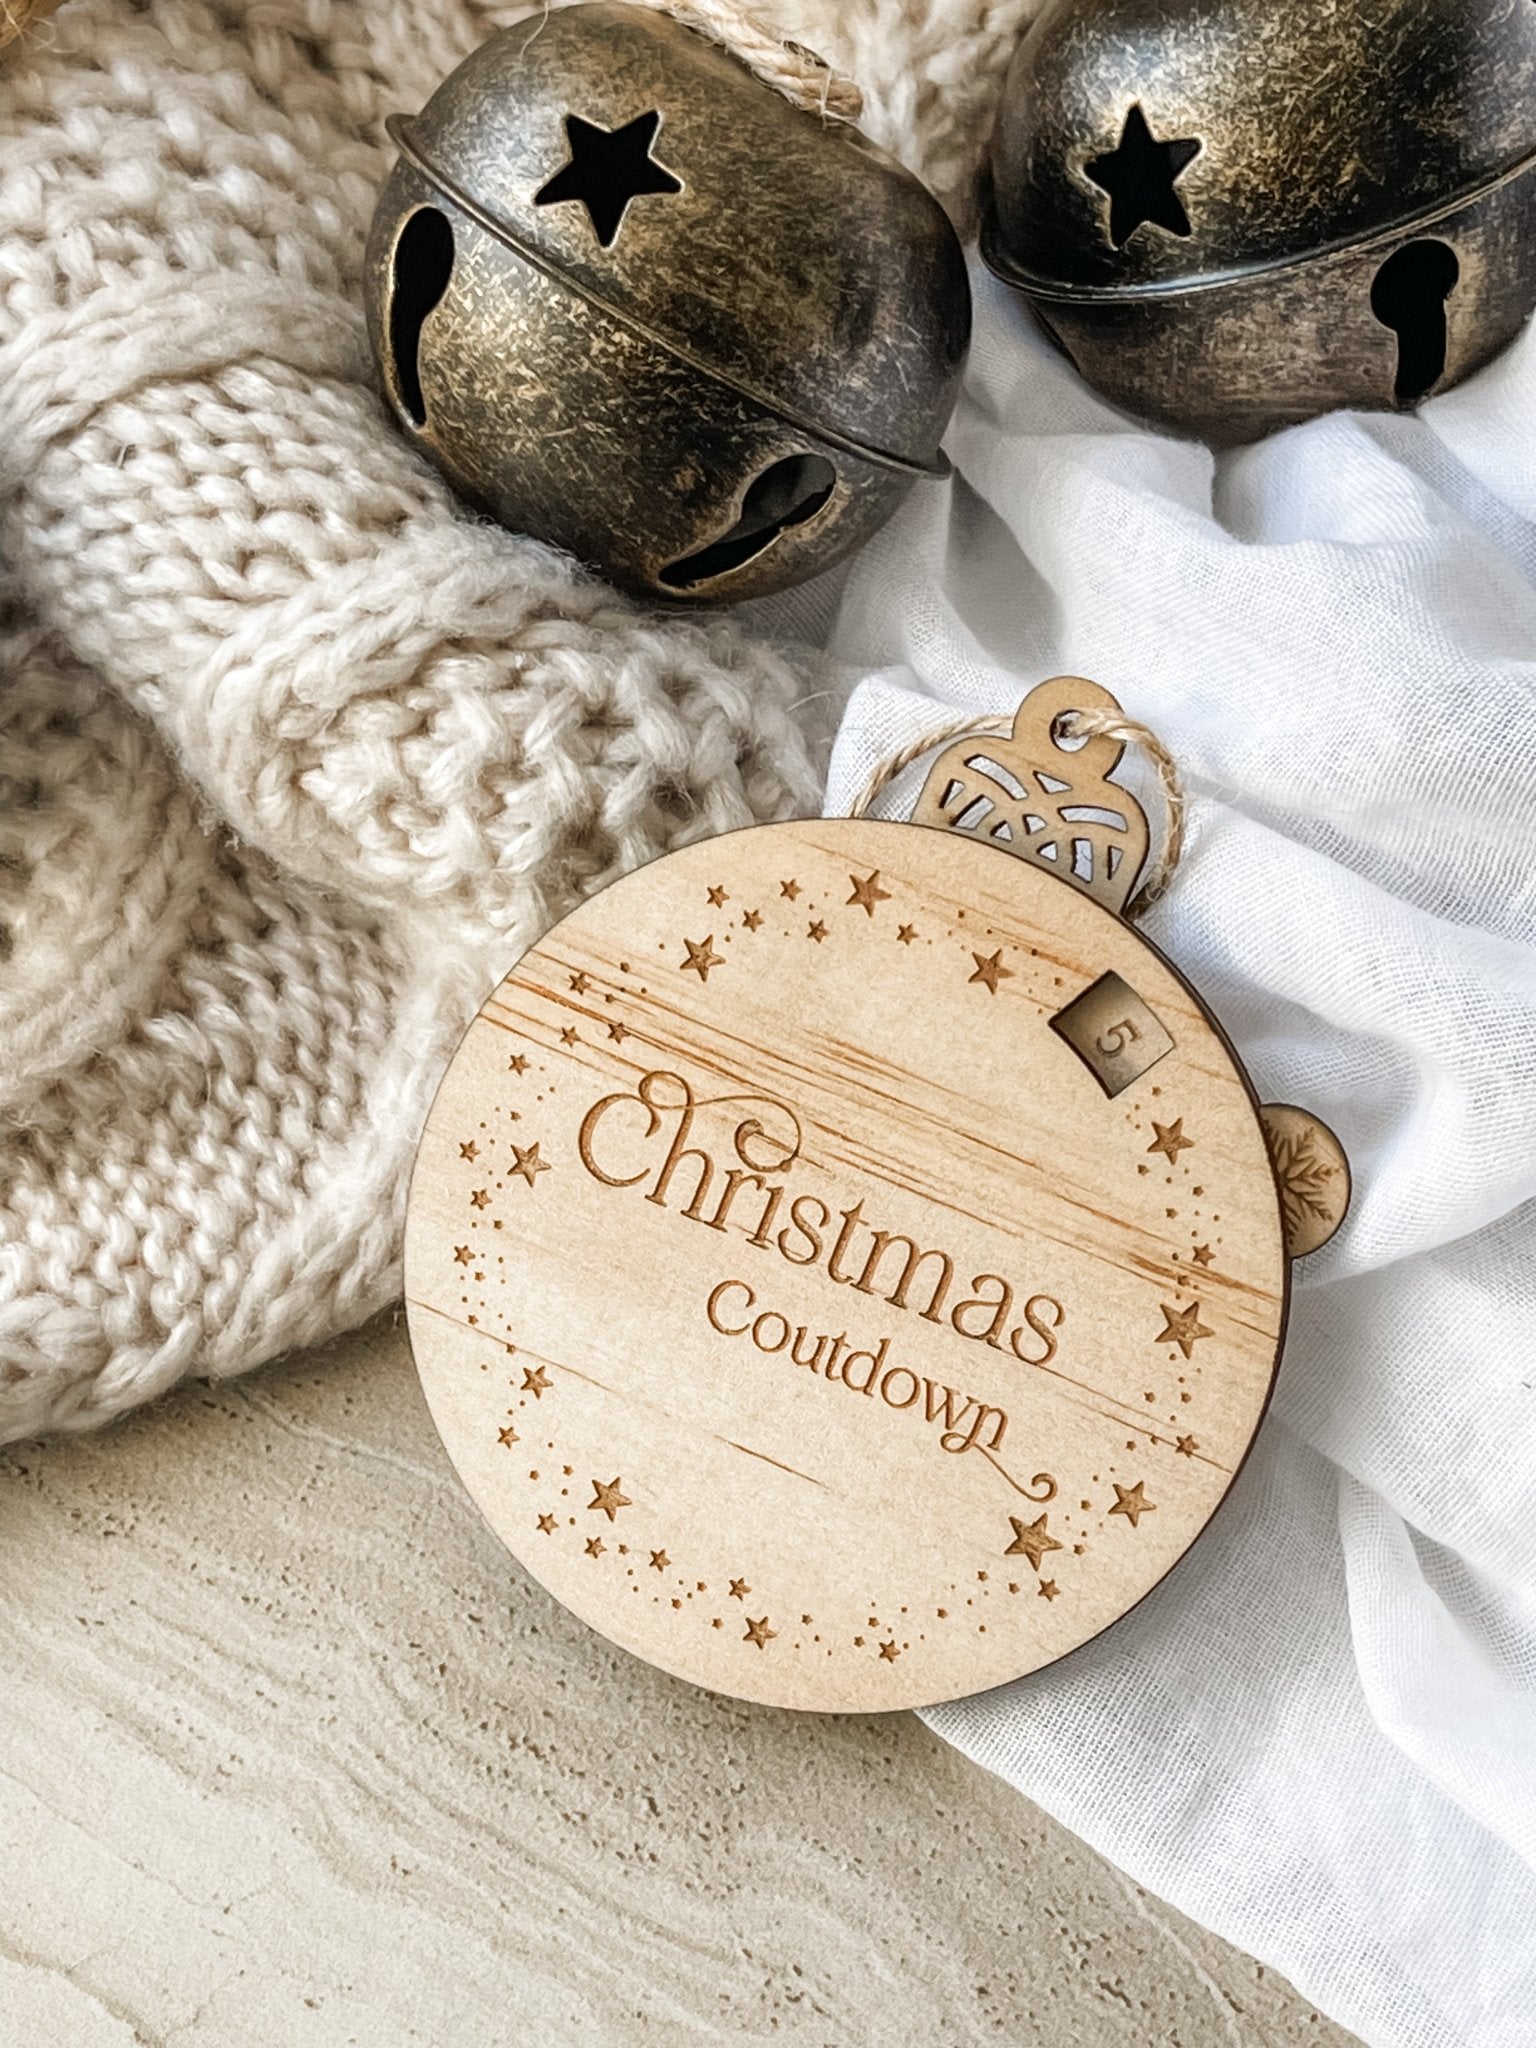 Christmas Countdown Ornament - The Humble Gift Co.